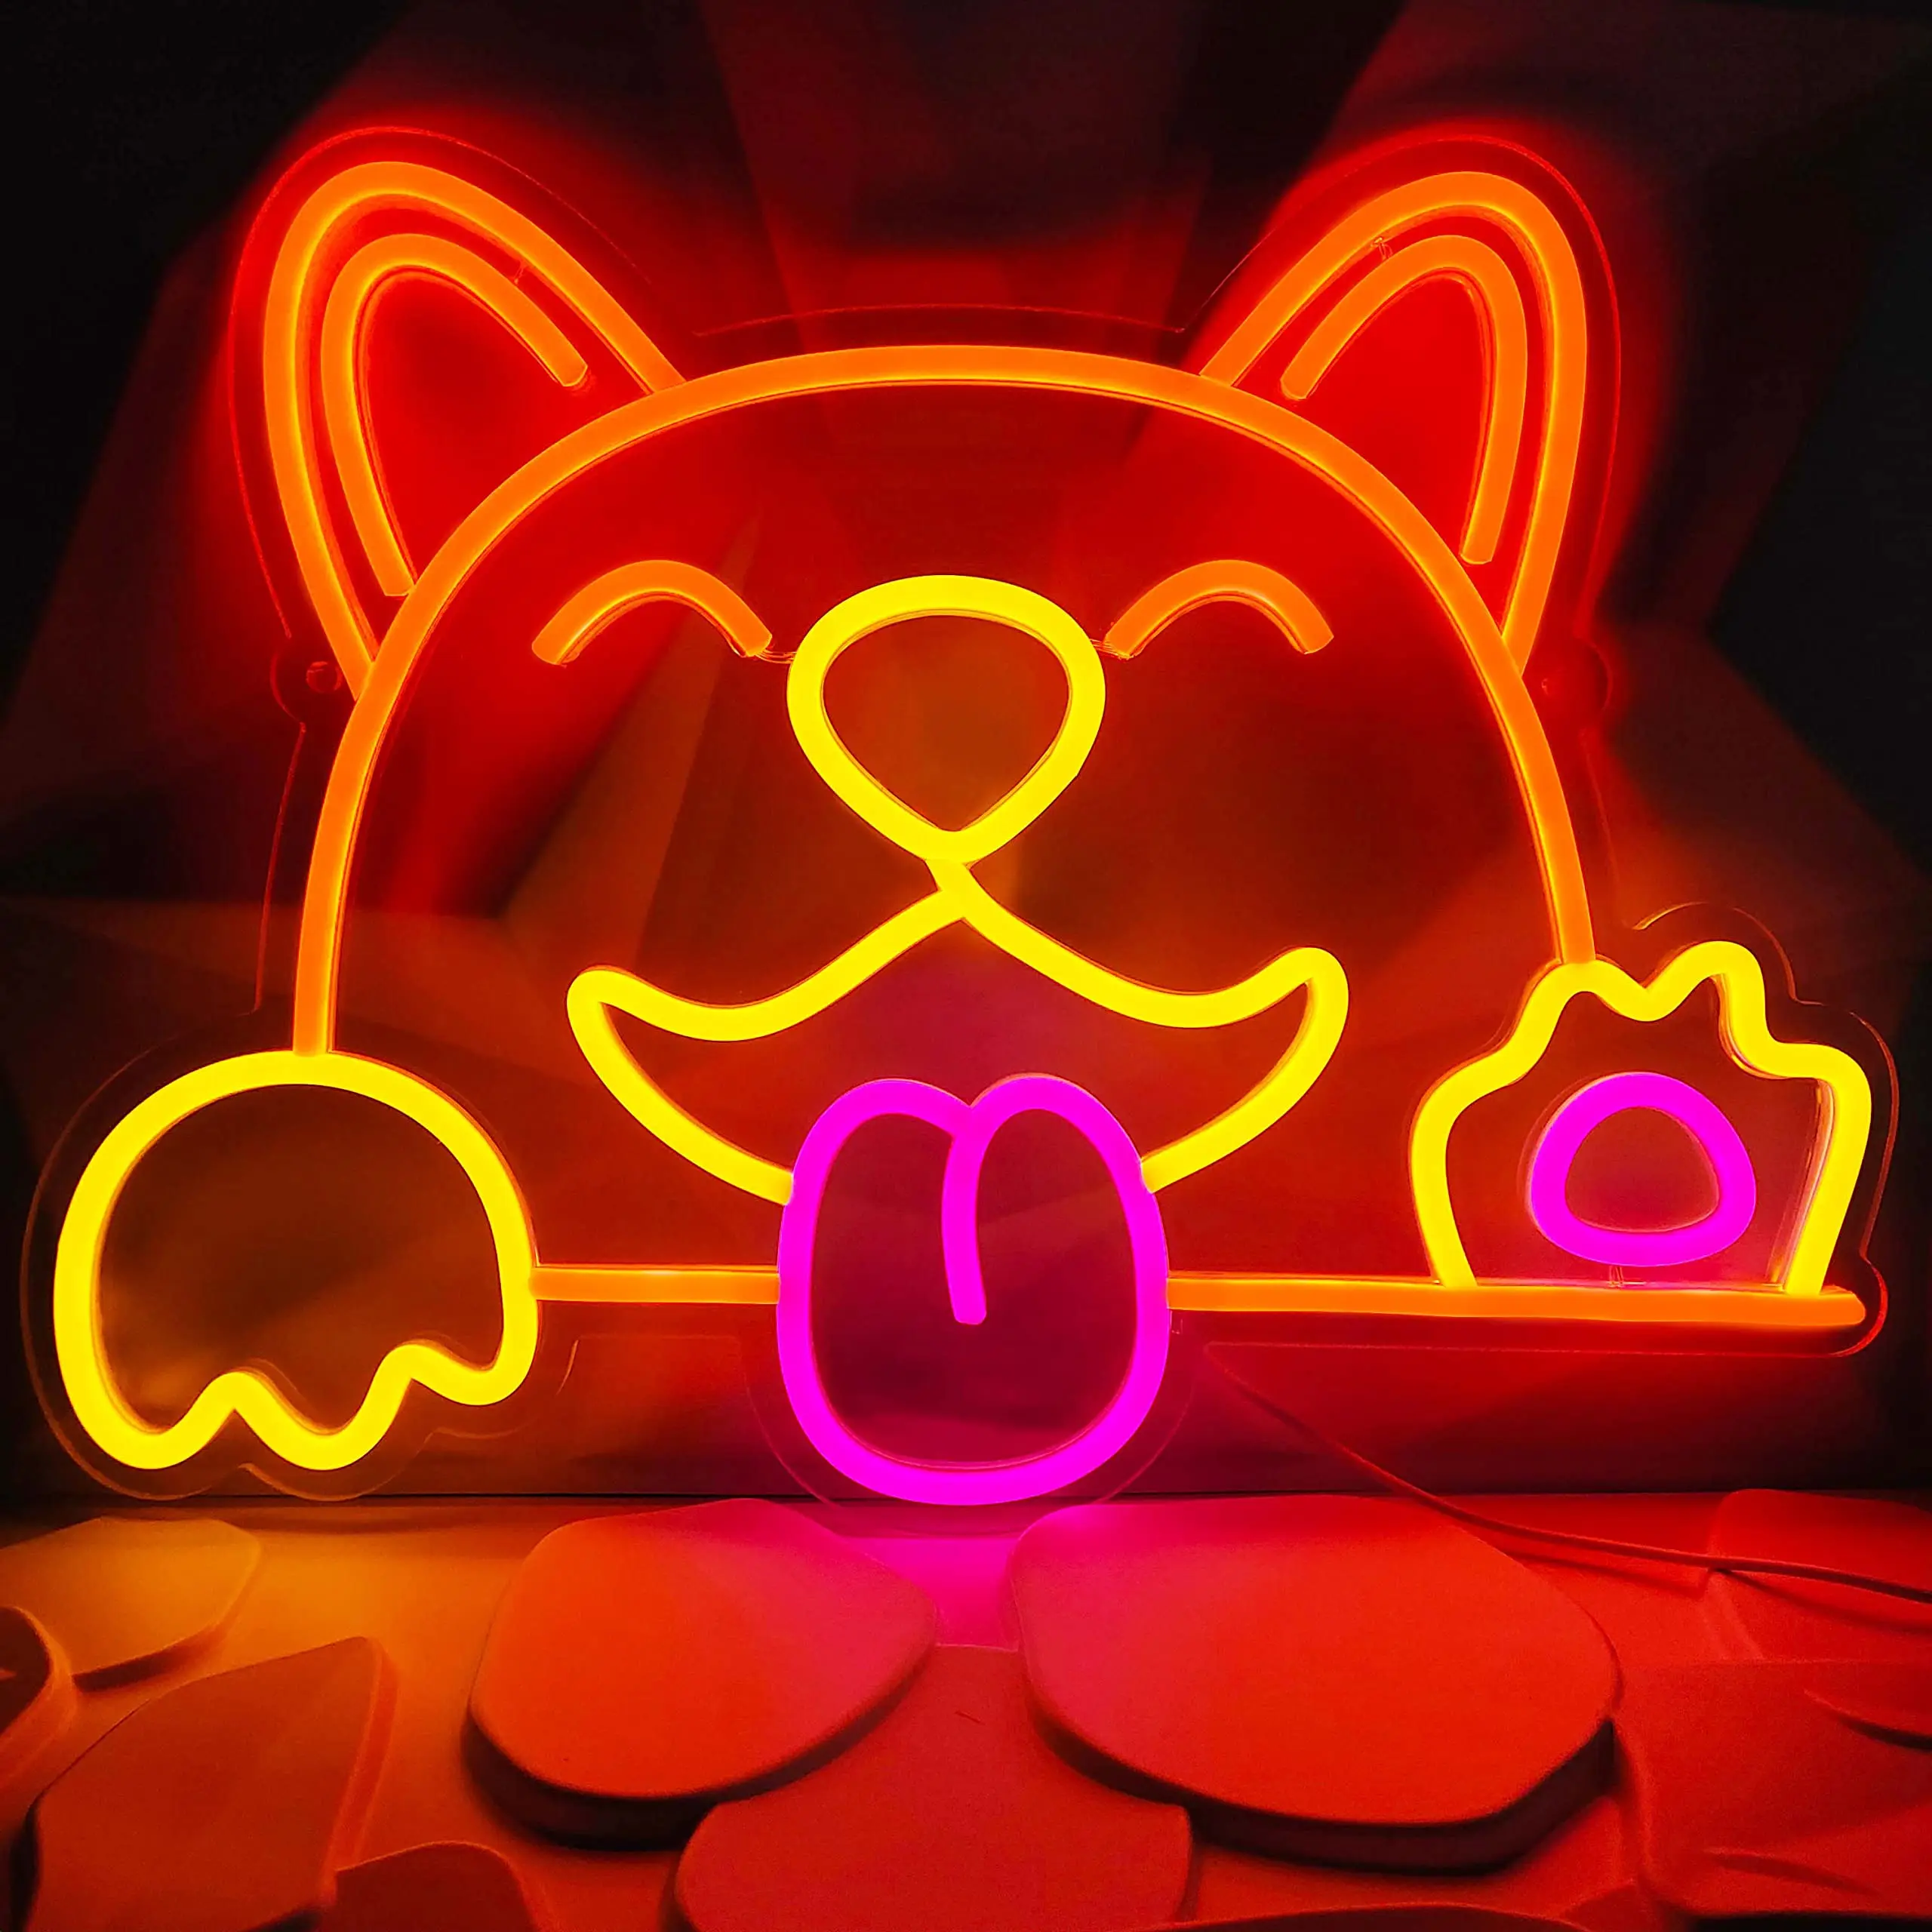 

Cute Dog Neon Signs Game Room LED Neon Light USB Powered Acrylic Wall Decoration for Kids Bedroom Boys Room Playroom